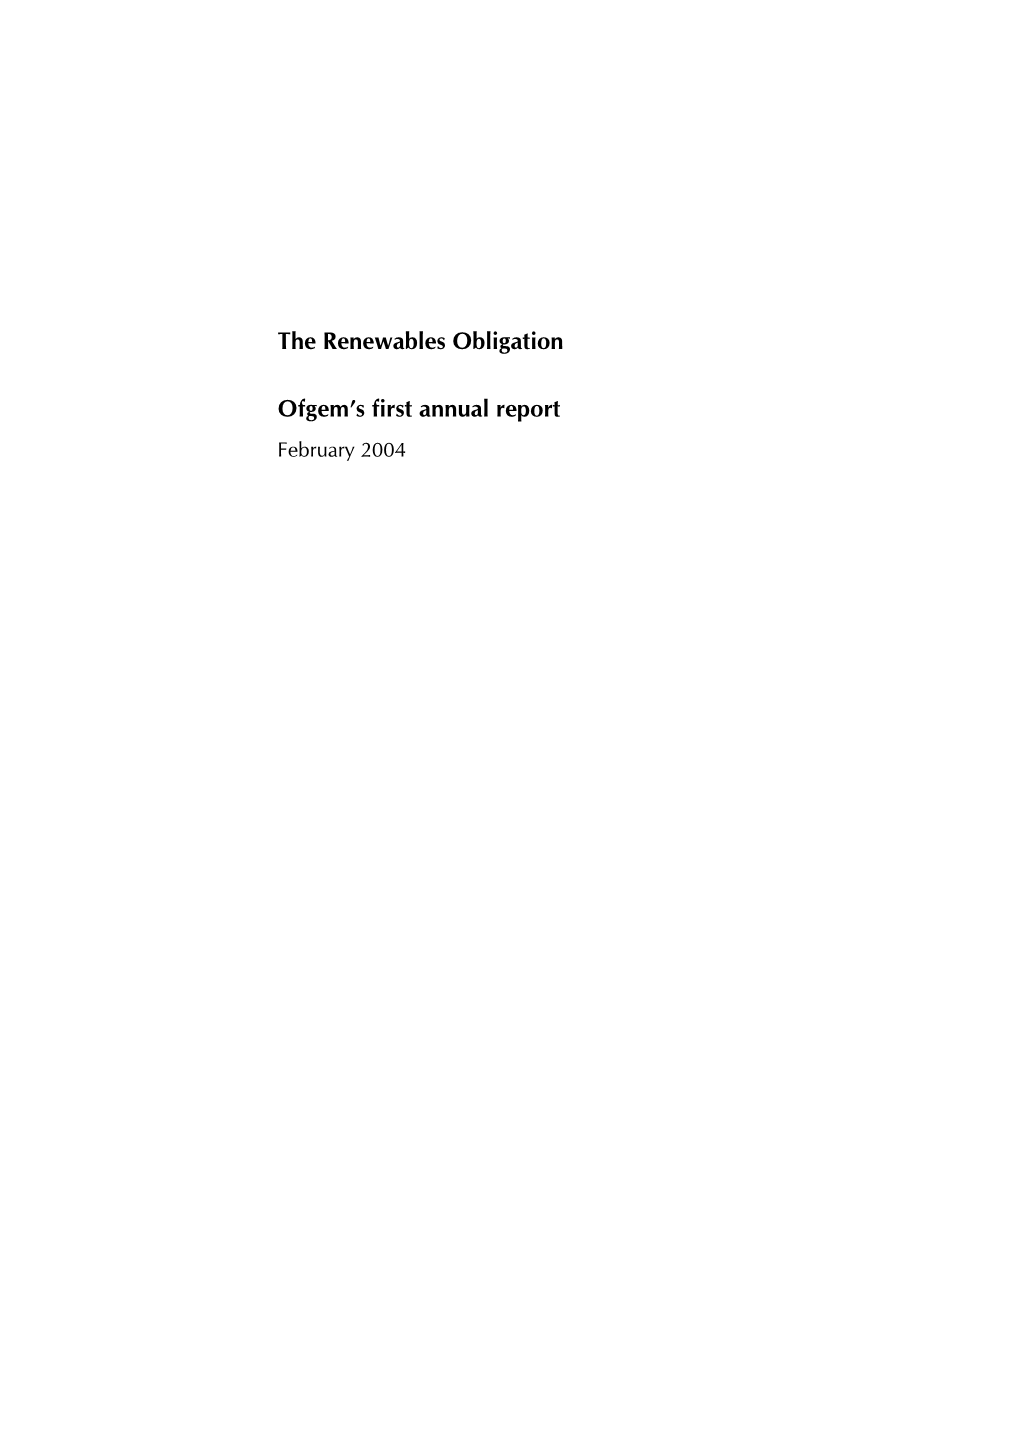 The Renewables Obligation Ofgem's First Annual Report